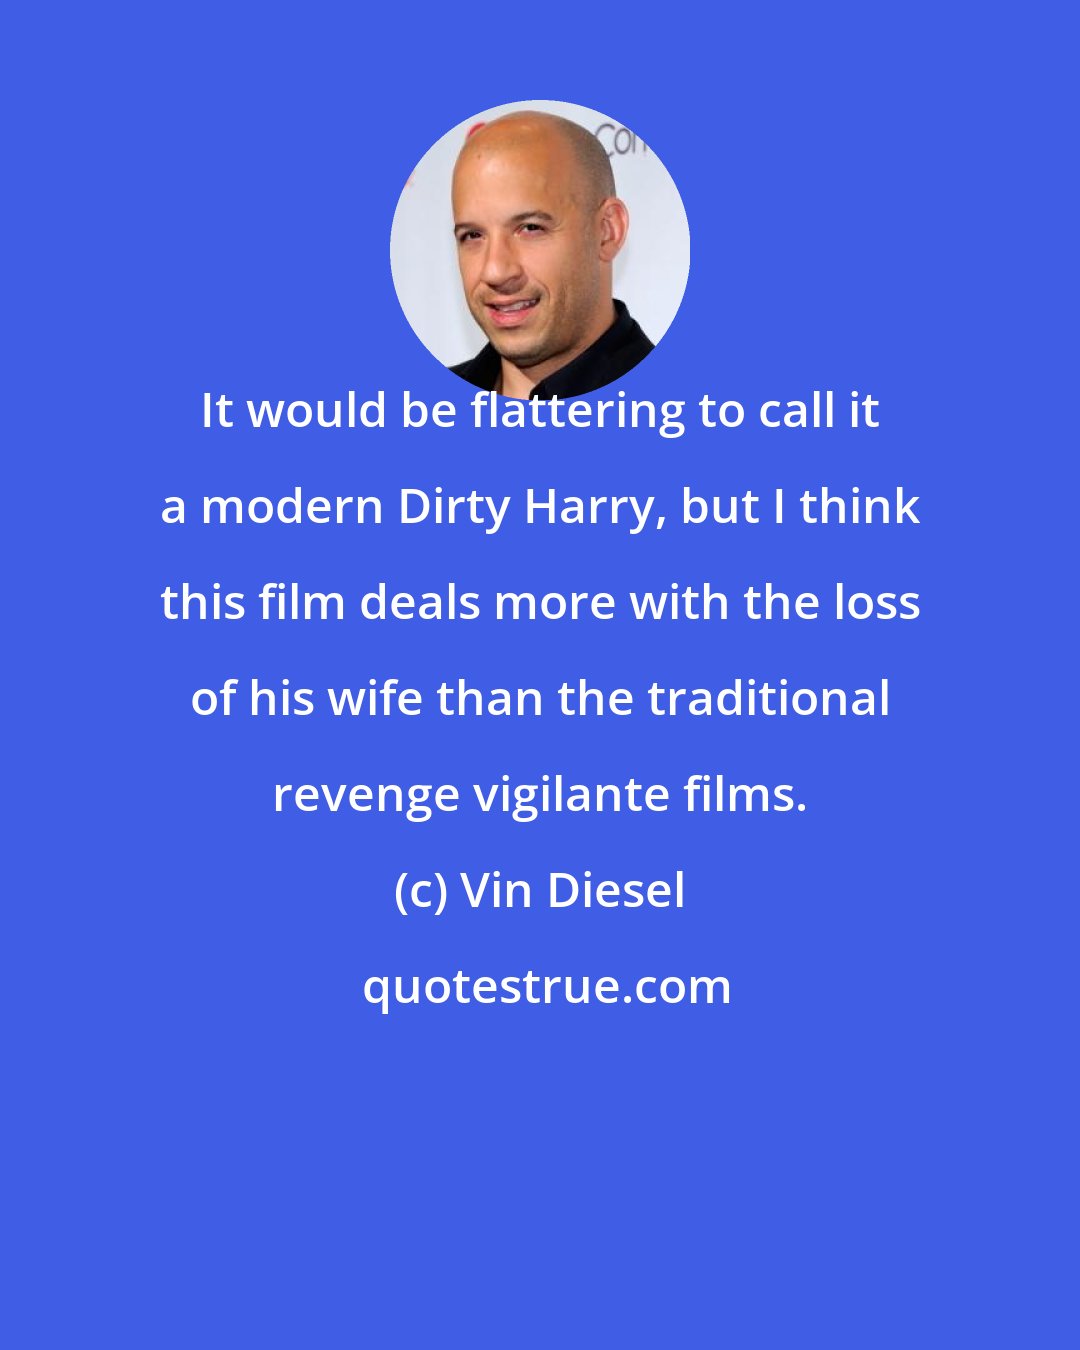 Vin Diesel: It would be flattering to call it a modern Dirty Harry, but I think this film deals more with the loss of his wife than the traditional revenge vigilante films.